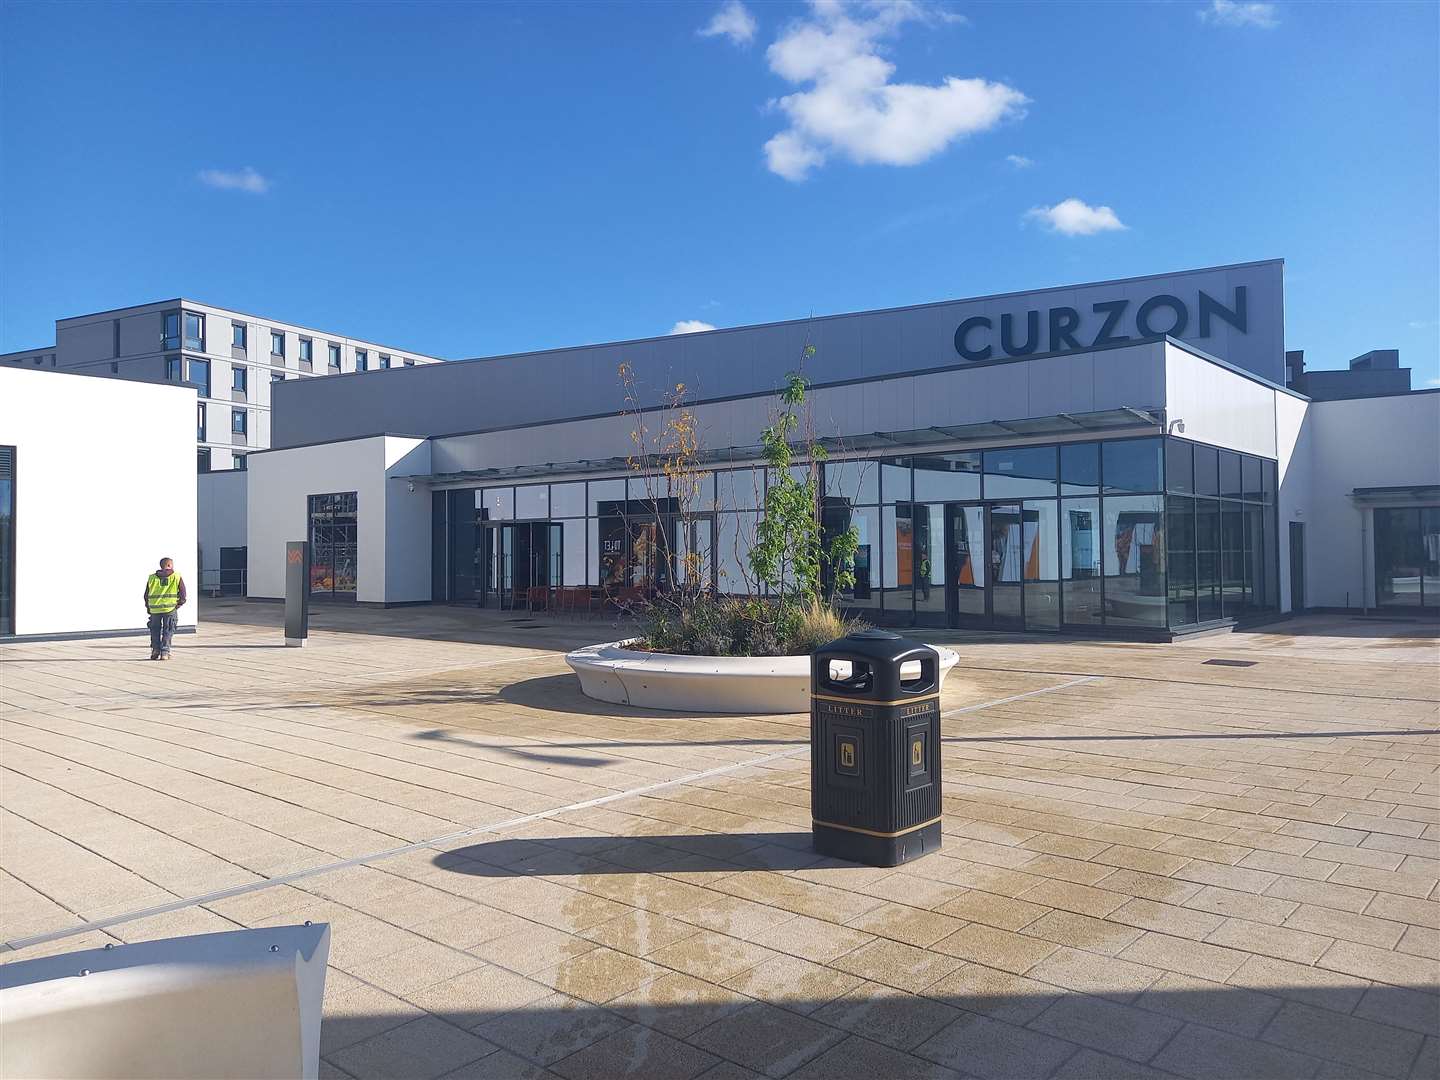 The Curzon cinema is already open at the development